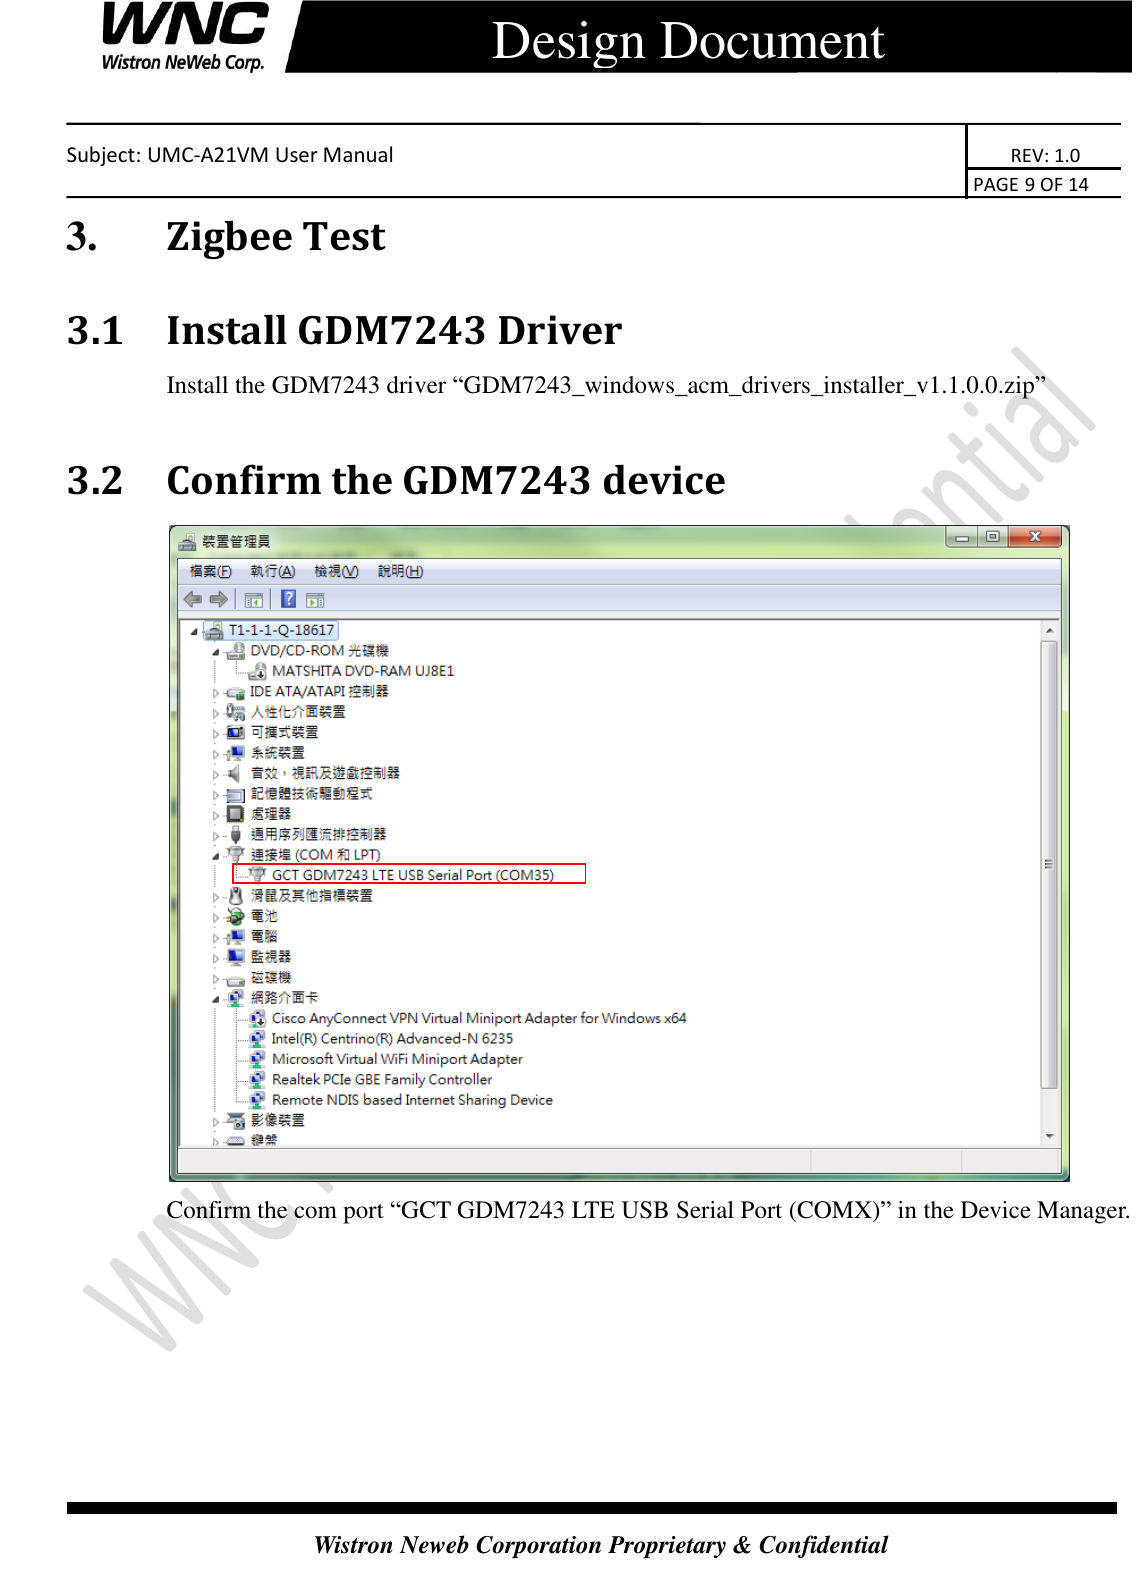    Subject: UMC-A21VM User Manual                                                                      REV: 1.0                                                                                        PAGE 9 OF 14  Wistron Neweb Corporation Proprietary &amp; Confidential      Design Document 3.       Zigbee Test 3.1 Install GDM7243 Driver Install the GDM7243 driver “GDM7243_windows_acm_drivers_installer_v1.1.0.0.zip”  3.2 Confirm the GDM7243 device  Confirm the com port “GCT GDM7243 LTE USB Serial Port (COMX)” in the Device Manager.    